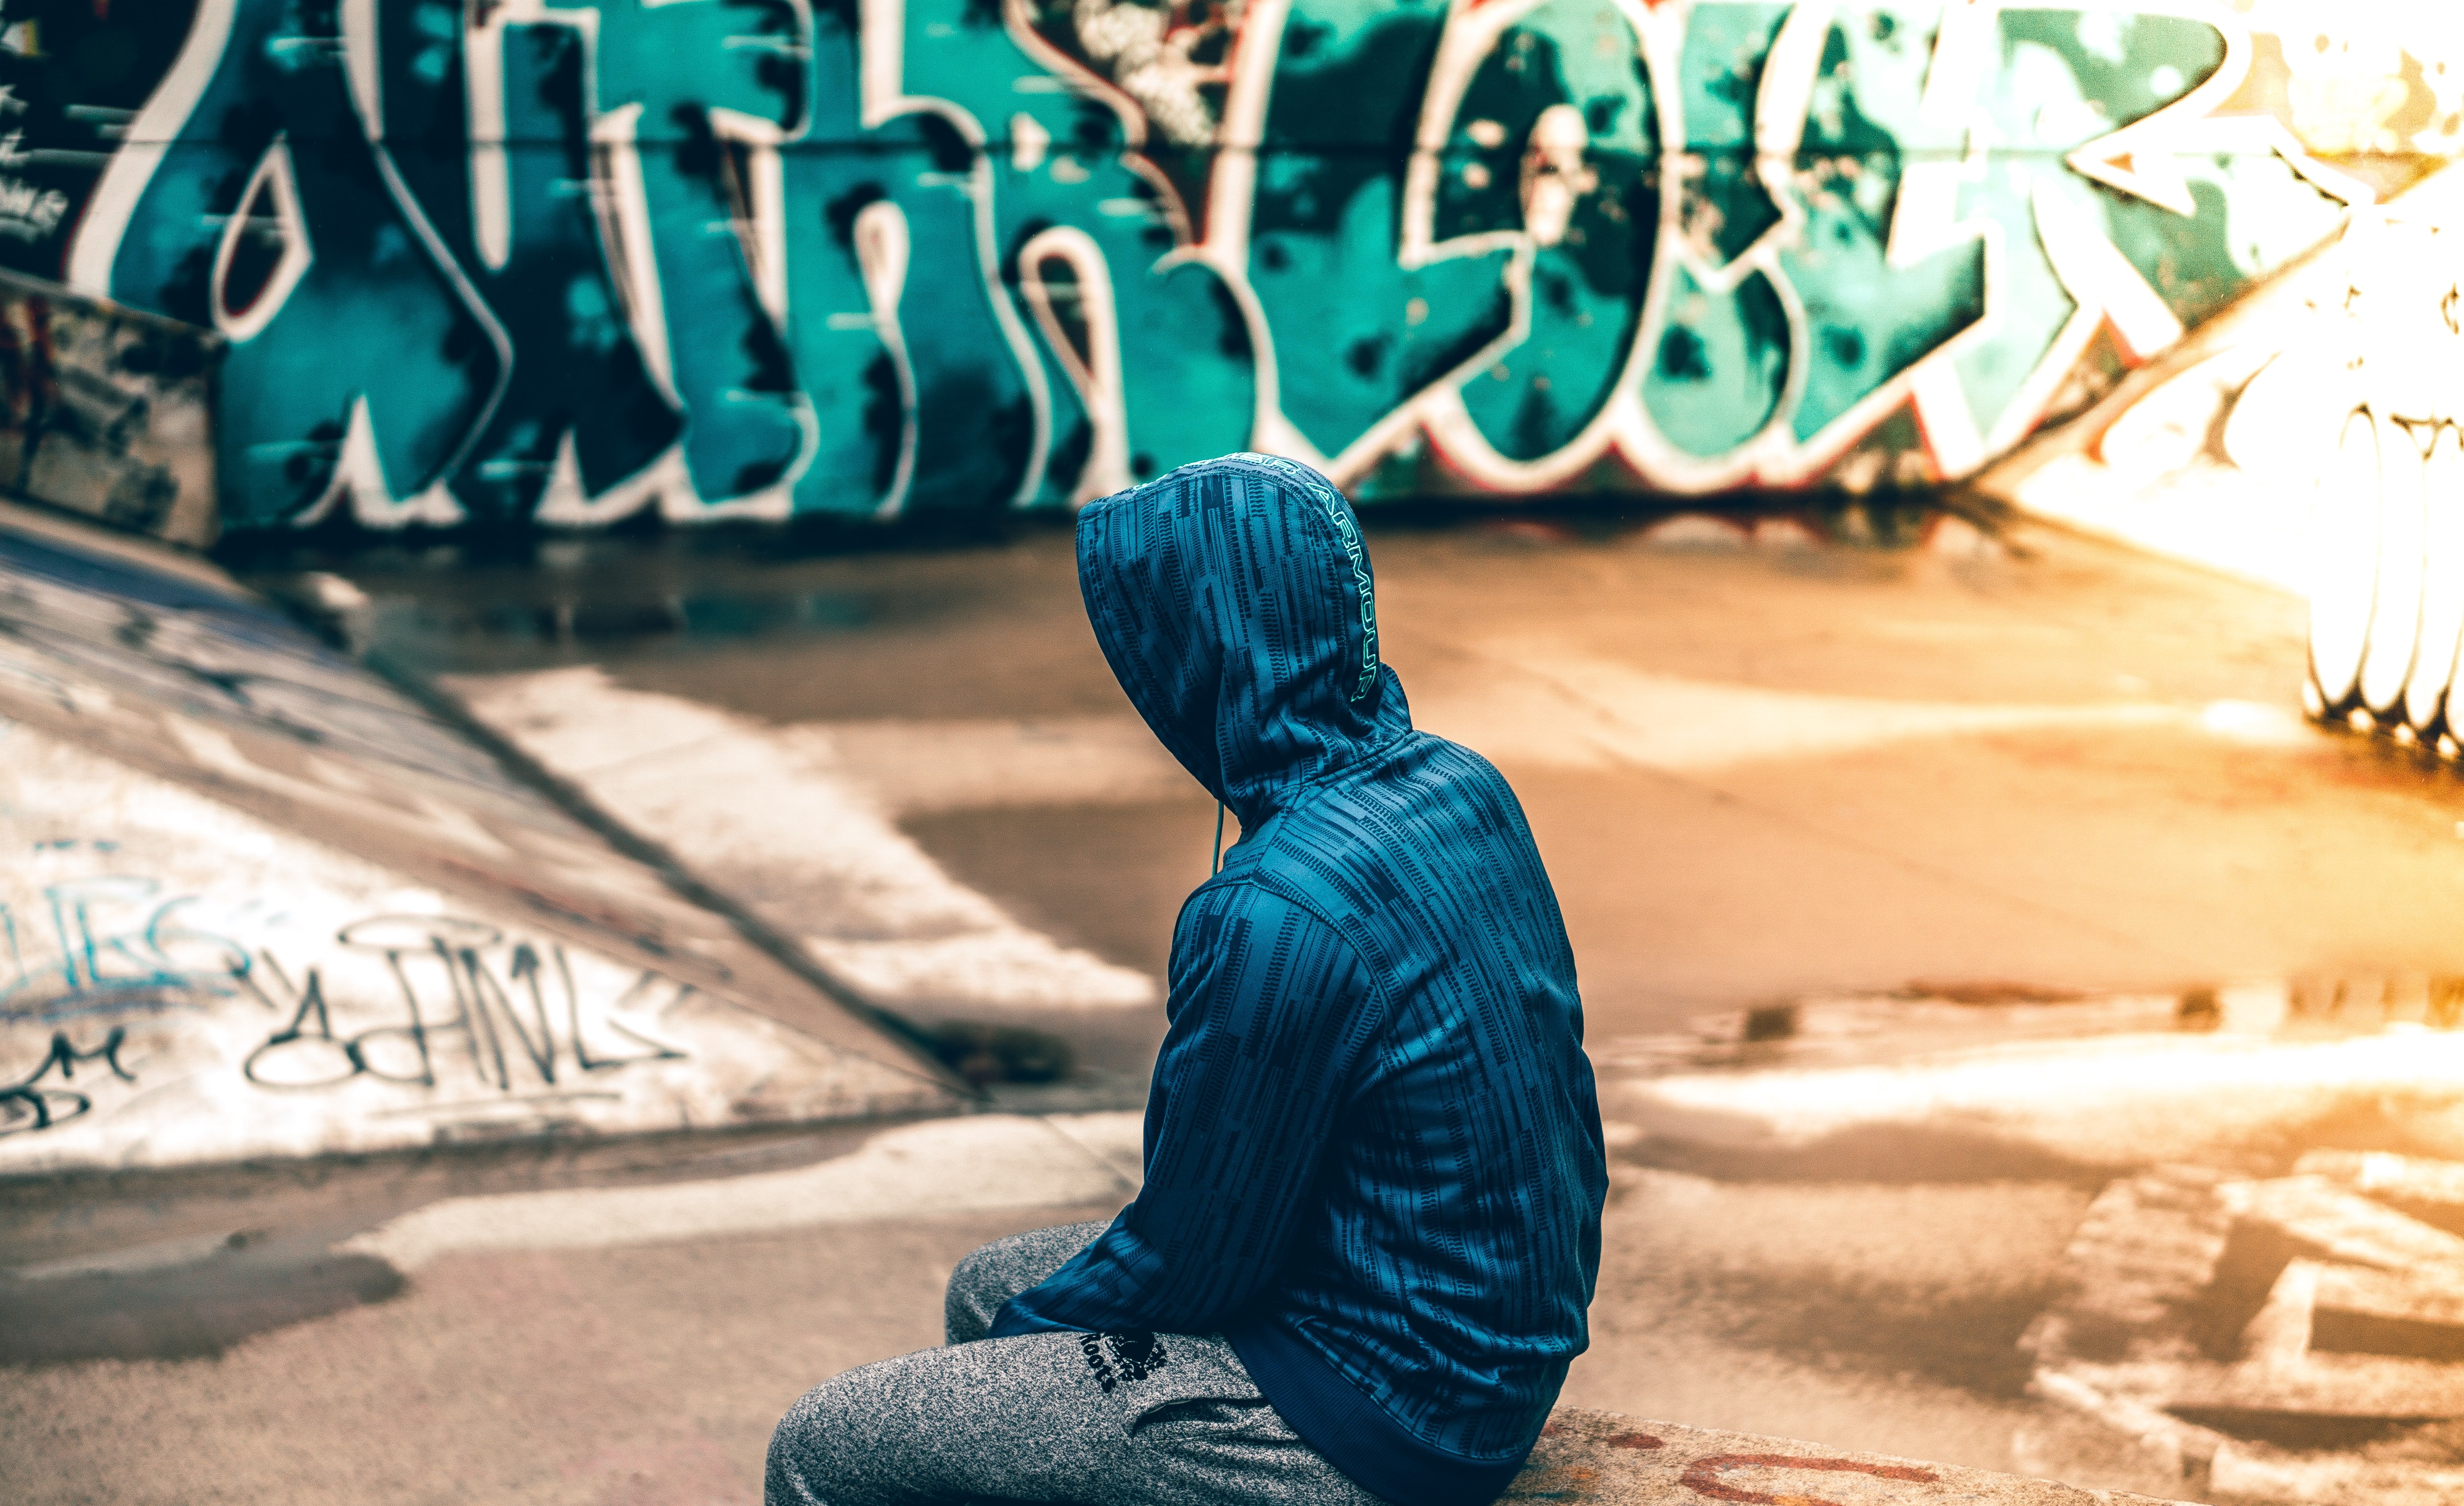 Todd was nervous about his appearance & always covered up with his hoodie. | Source: Unsplash